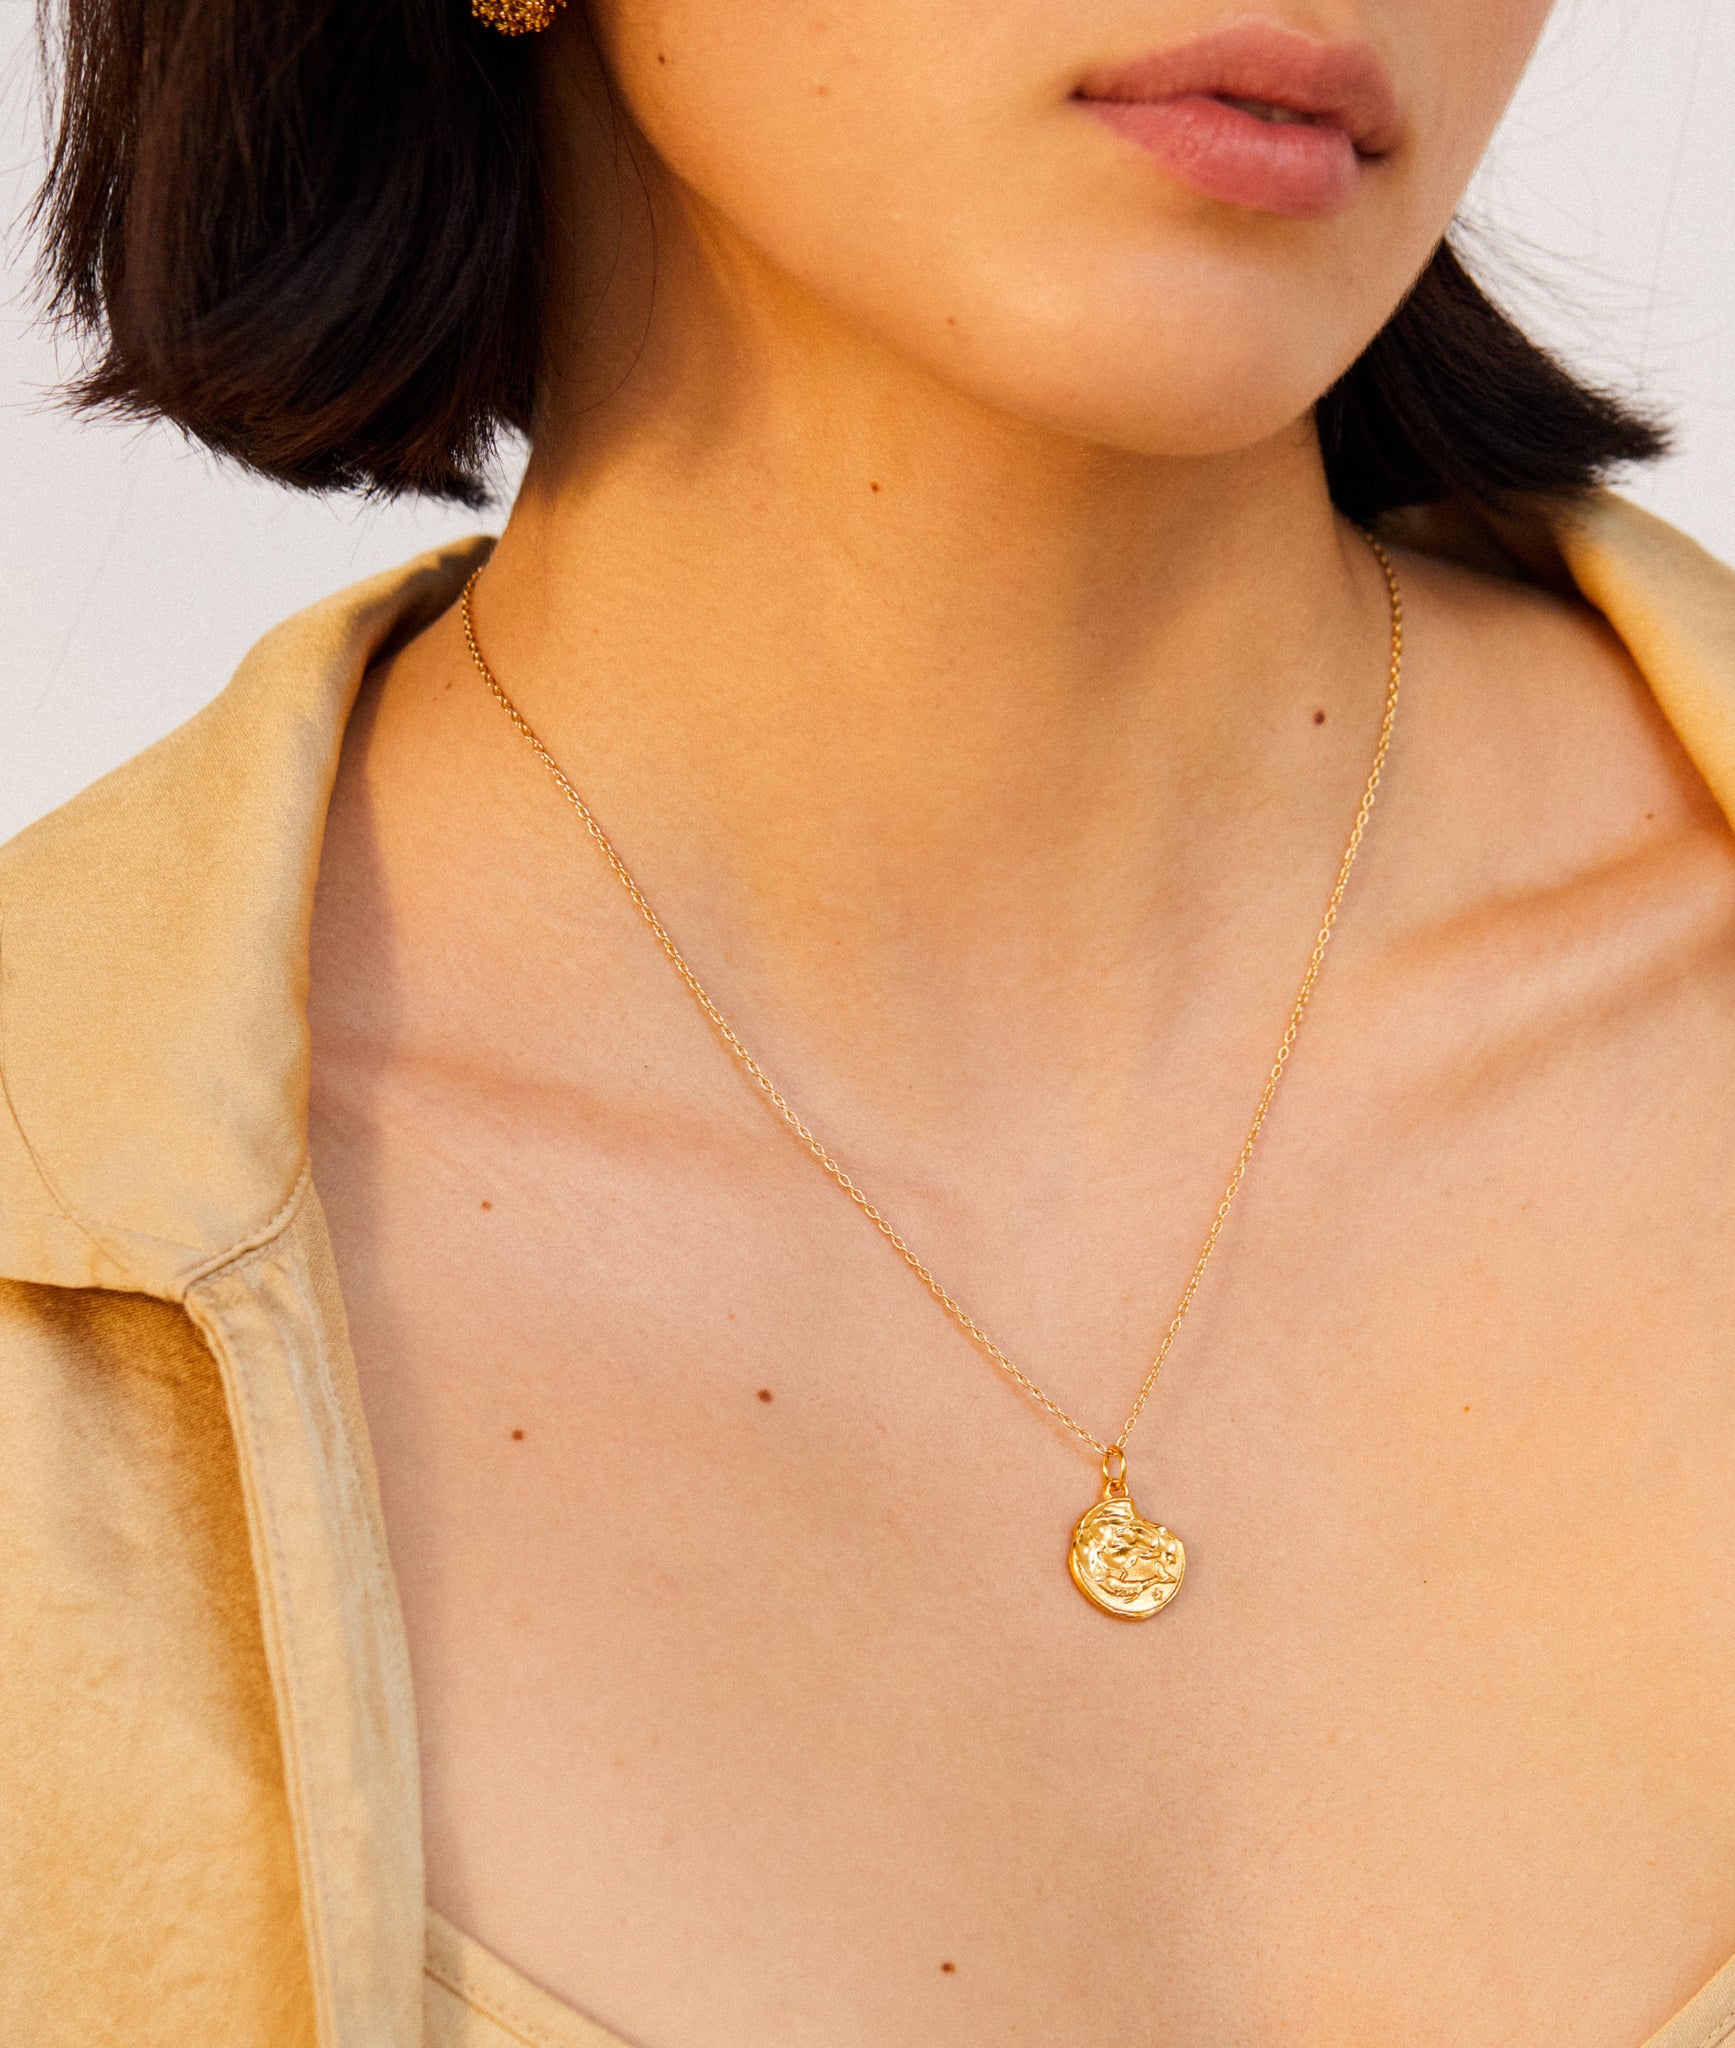 Female model wearing Alighieri Gold Plated Pisces Zodiac Necklace  Medallion